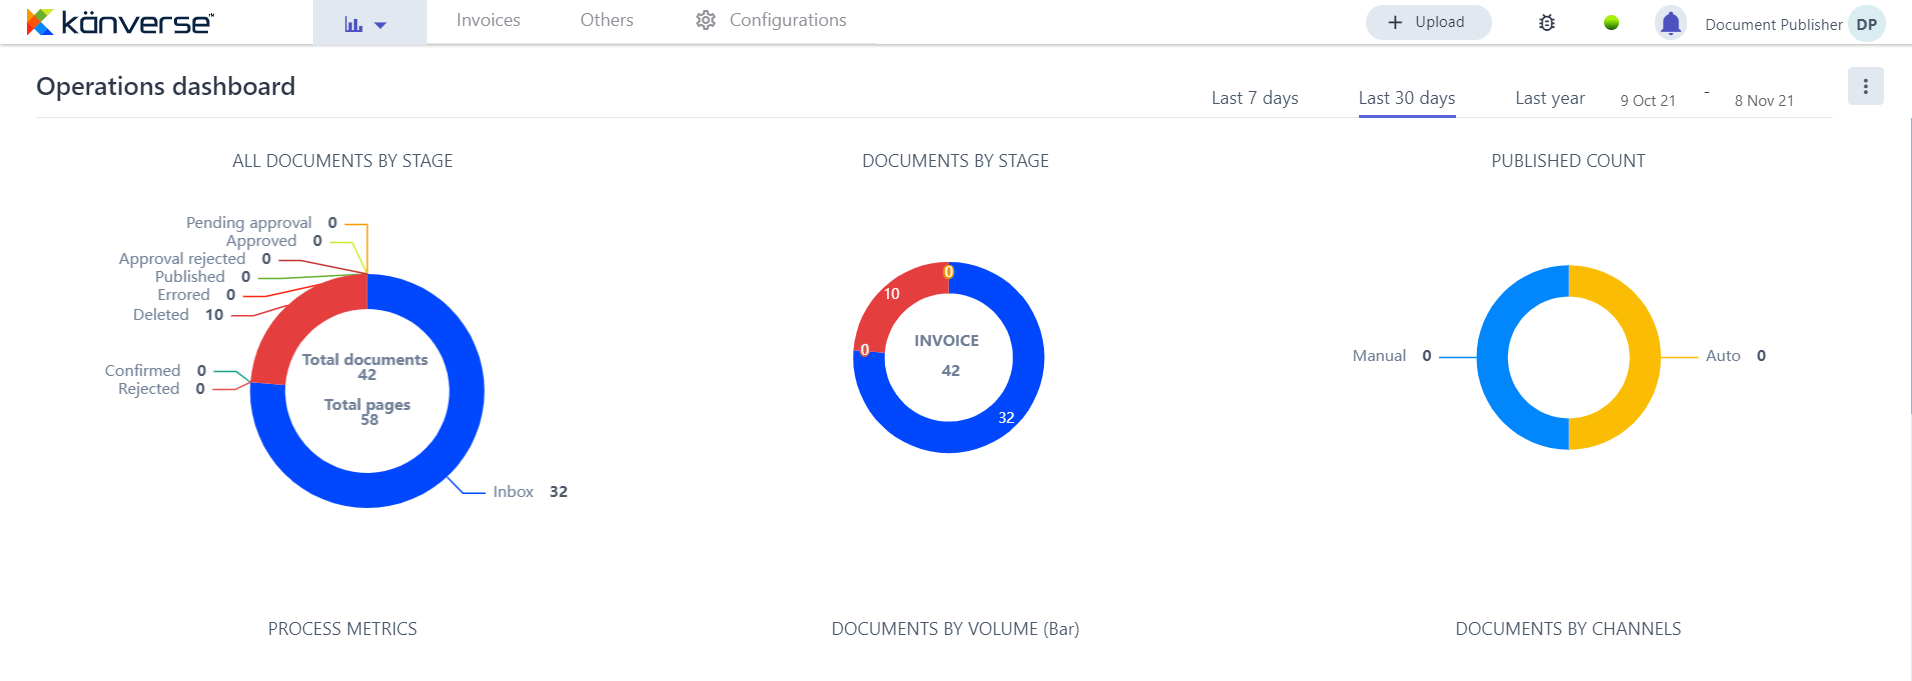 Kanverse Intelligent Document Processing operations dashboard